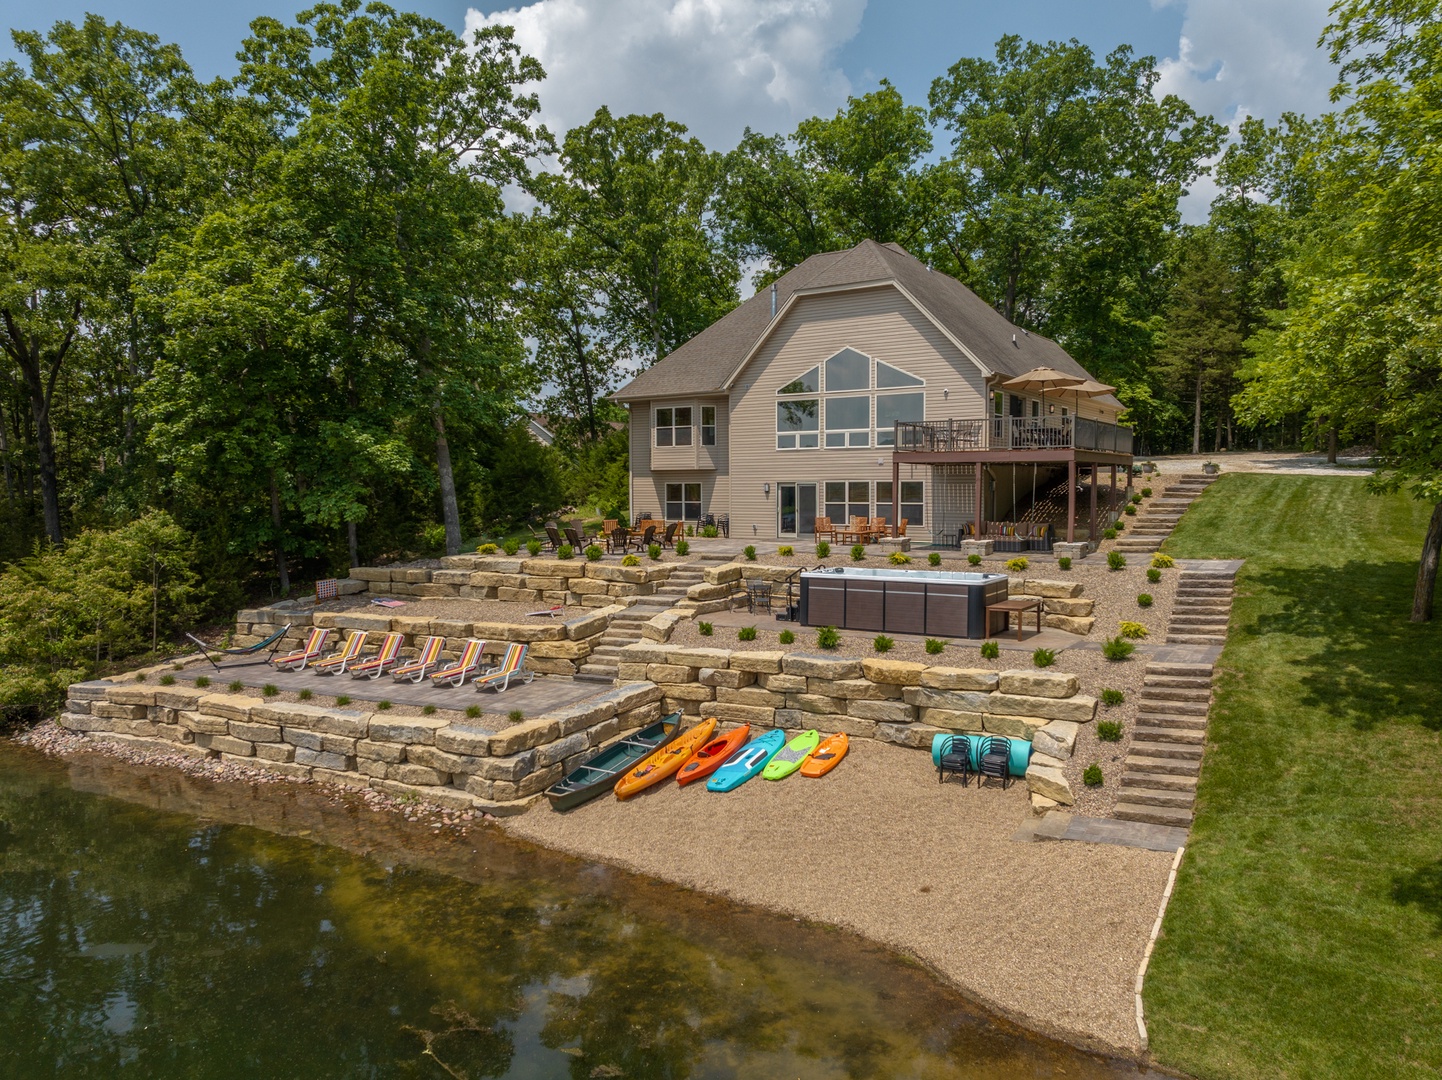 Live lake life to the fullest! Lounge in the sun on the private beach, fish off of the dock, or explore the water in one of our many water toys